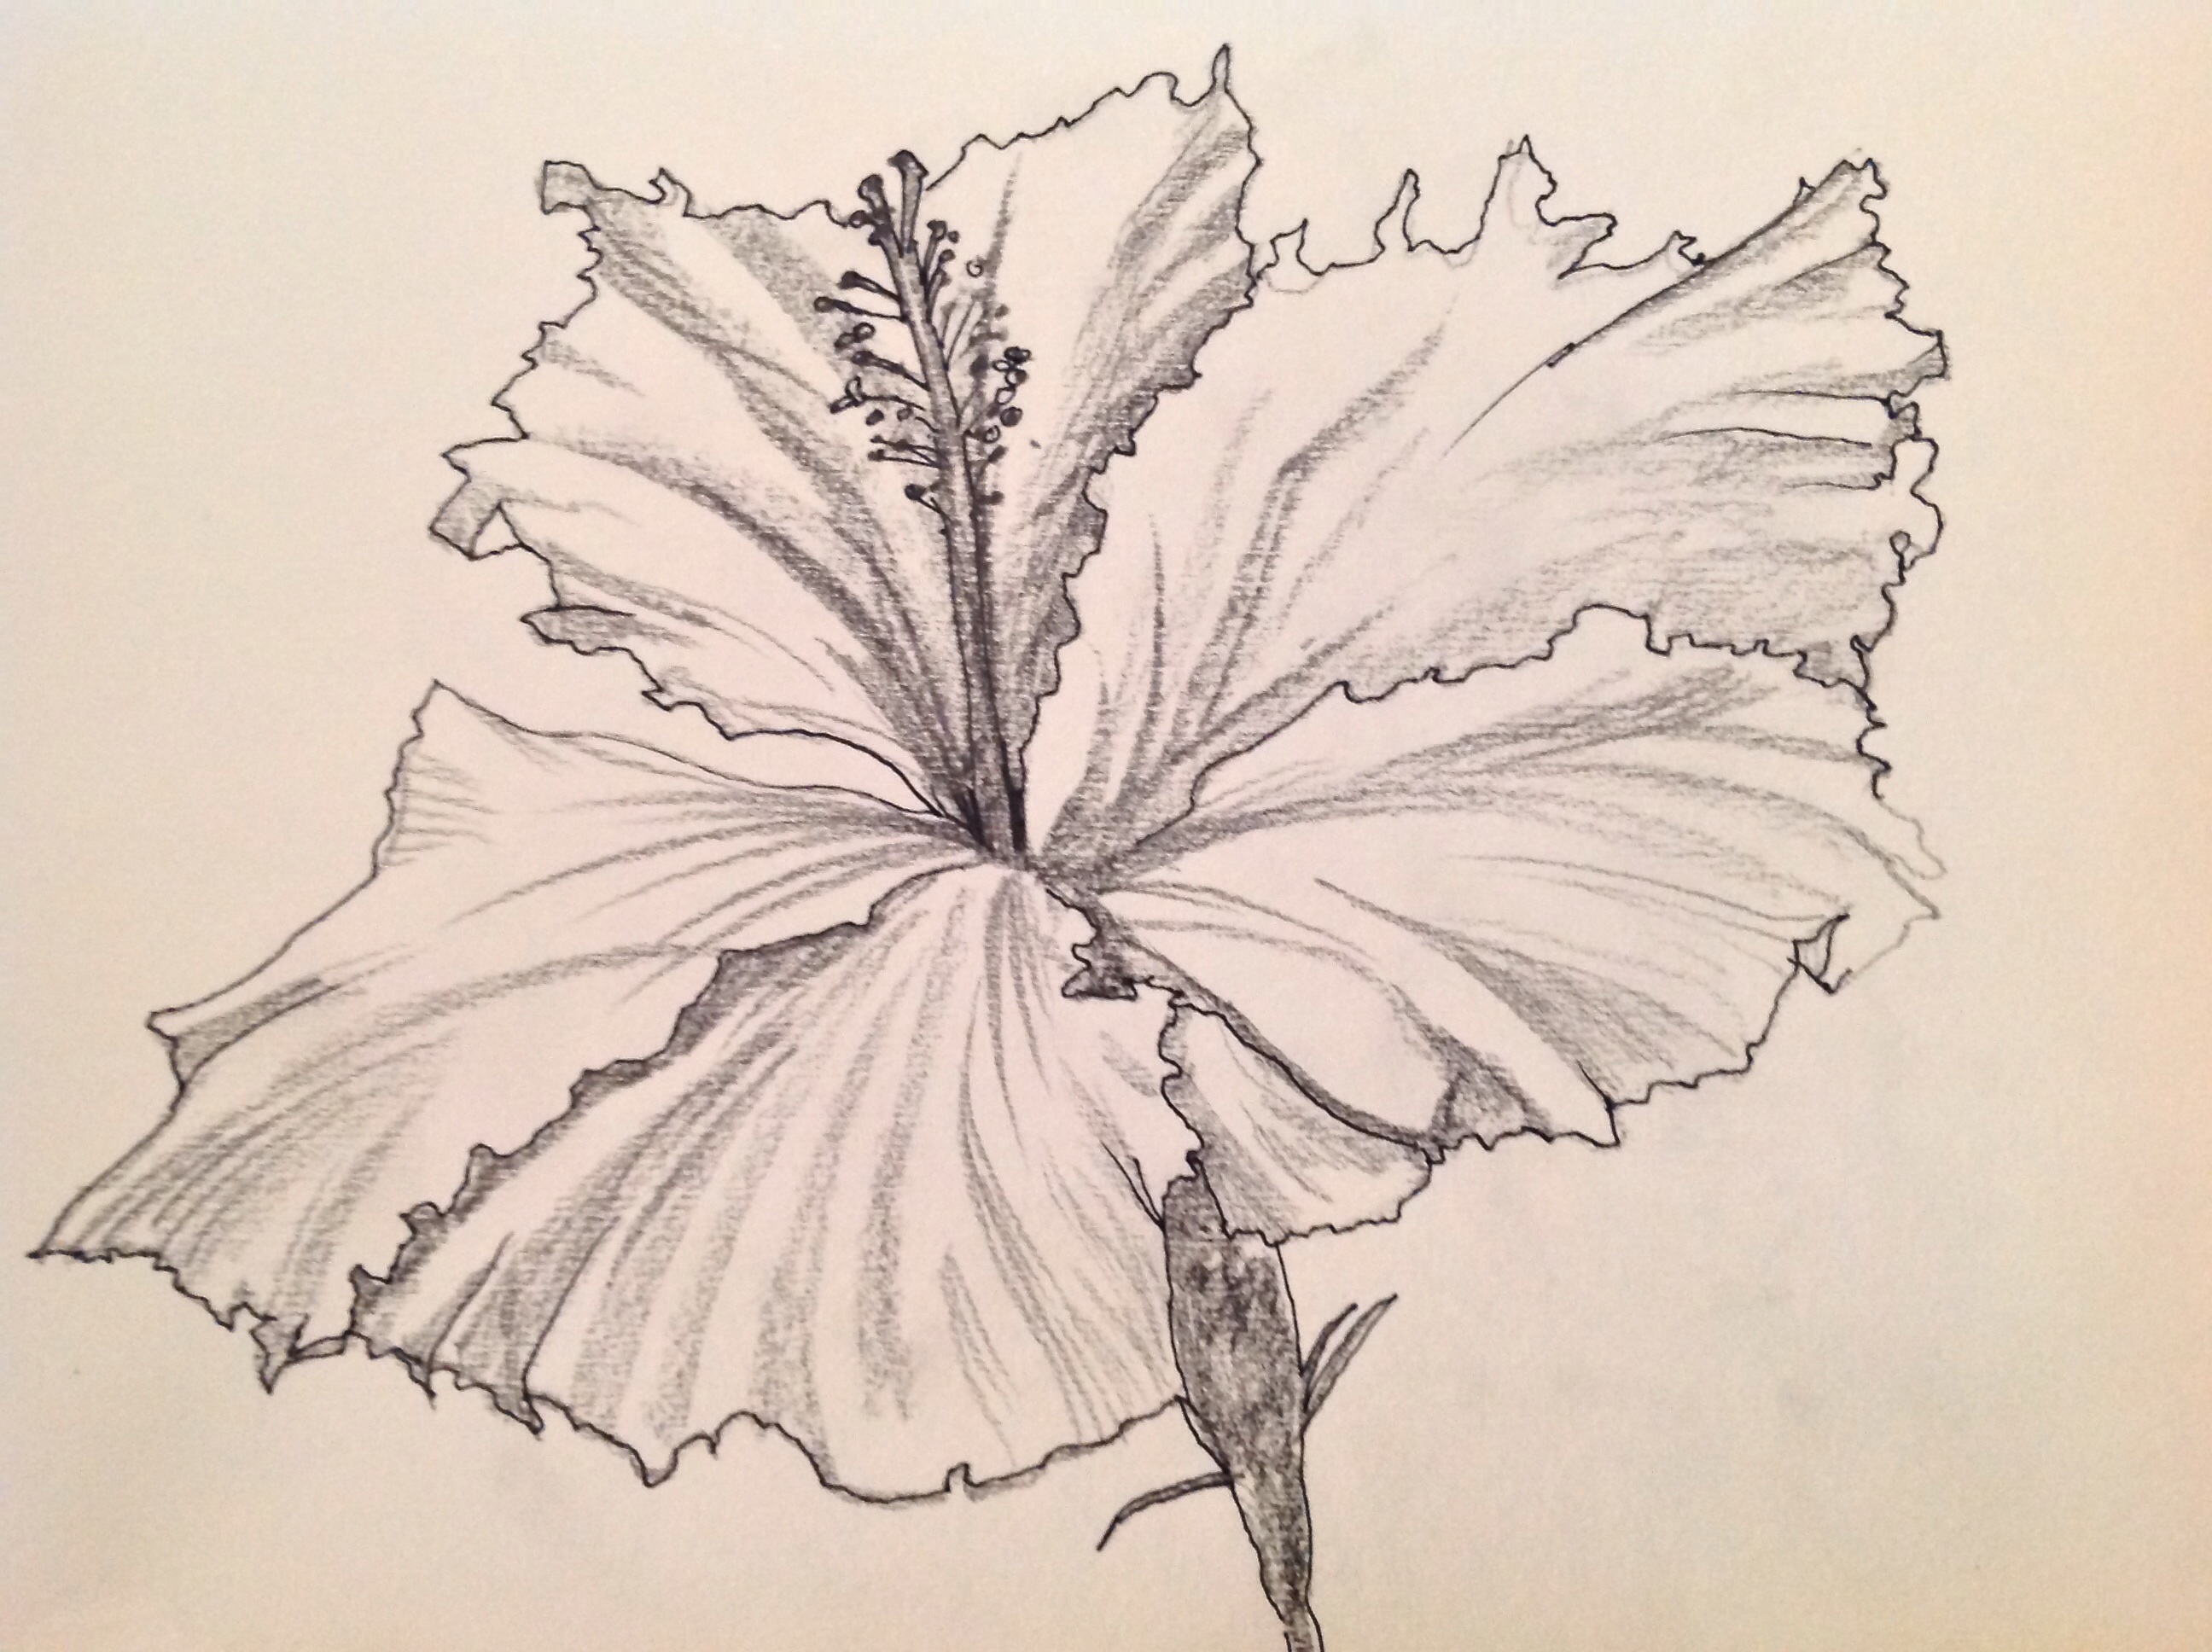 When Do You Need Art? Hibiscus Pen and Ink Drawings | Art Love Light